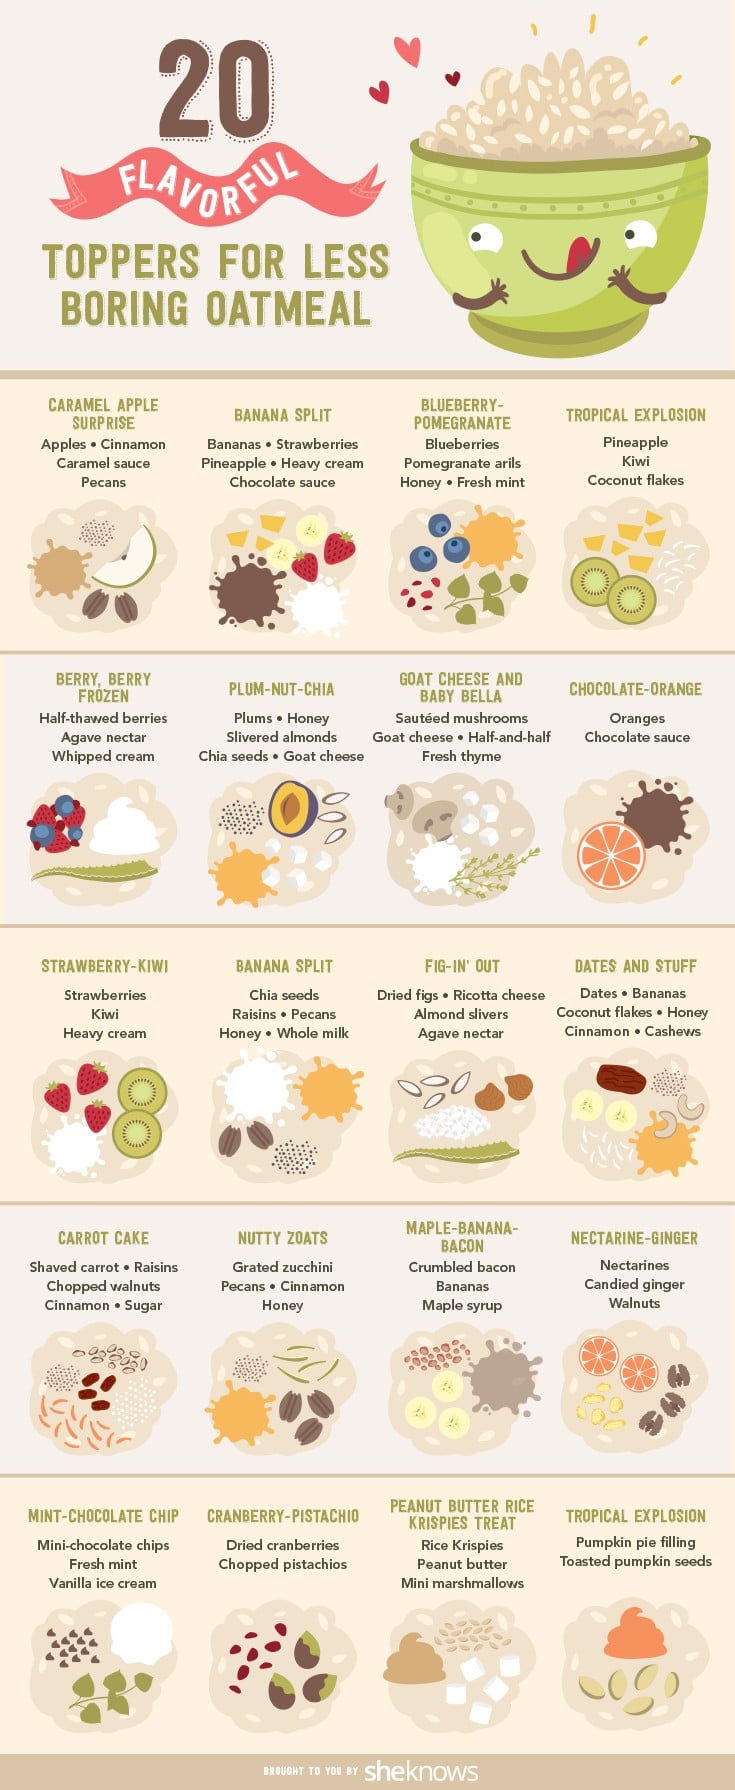 Oatmeal Toppings Infographic